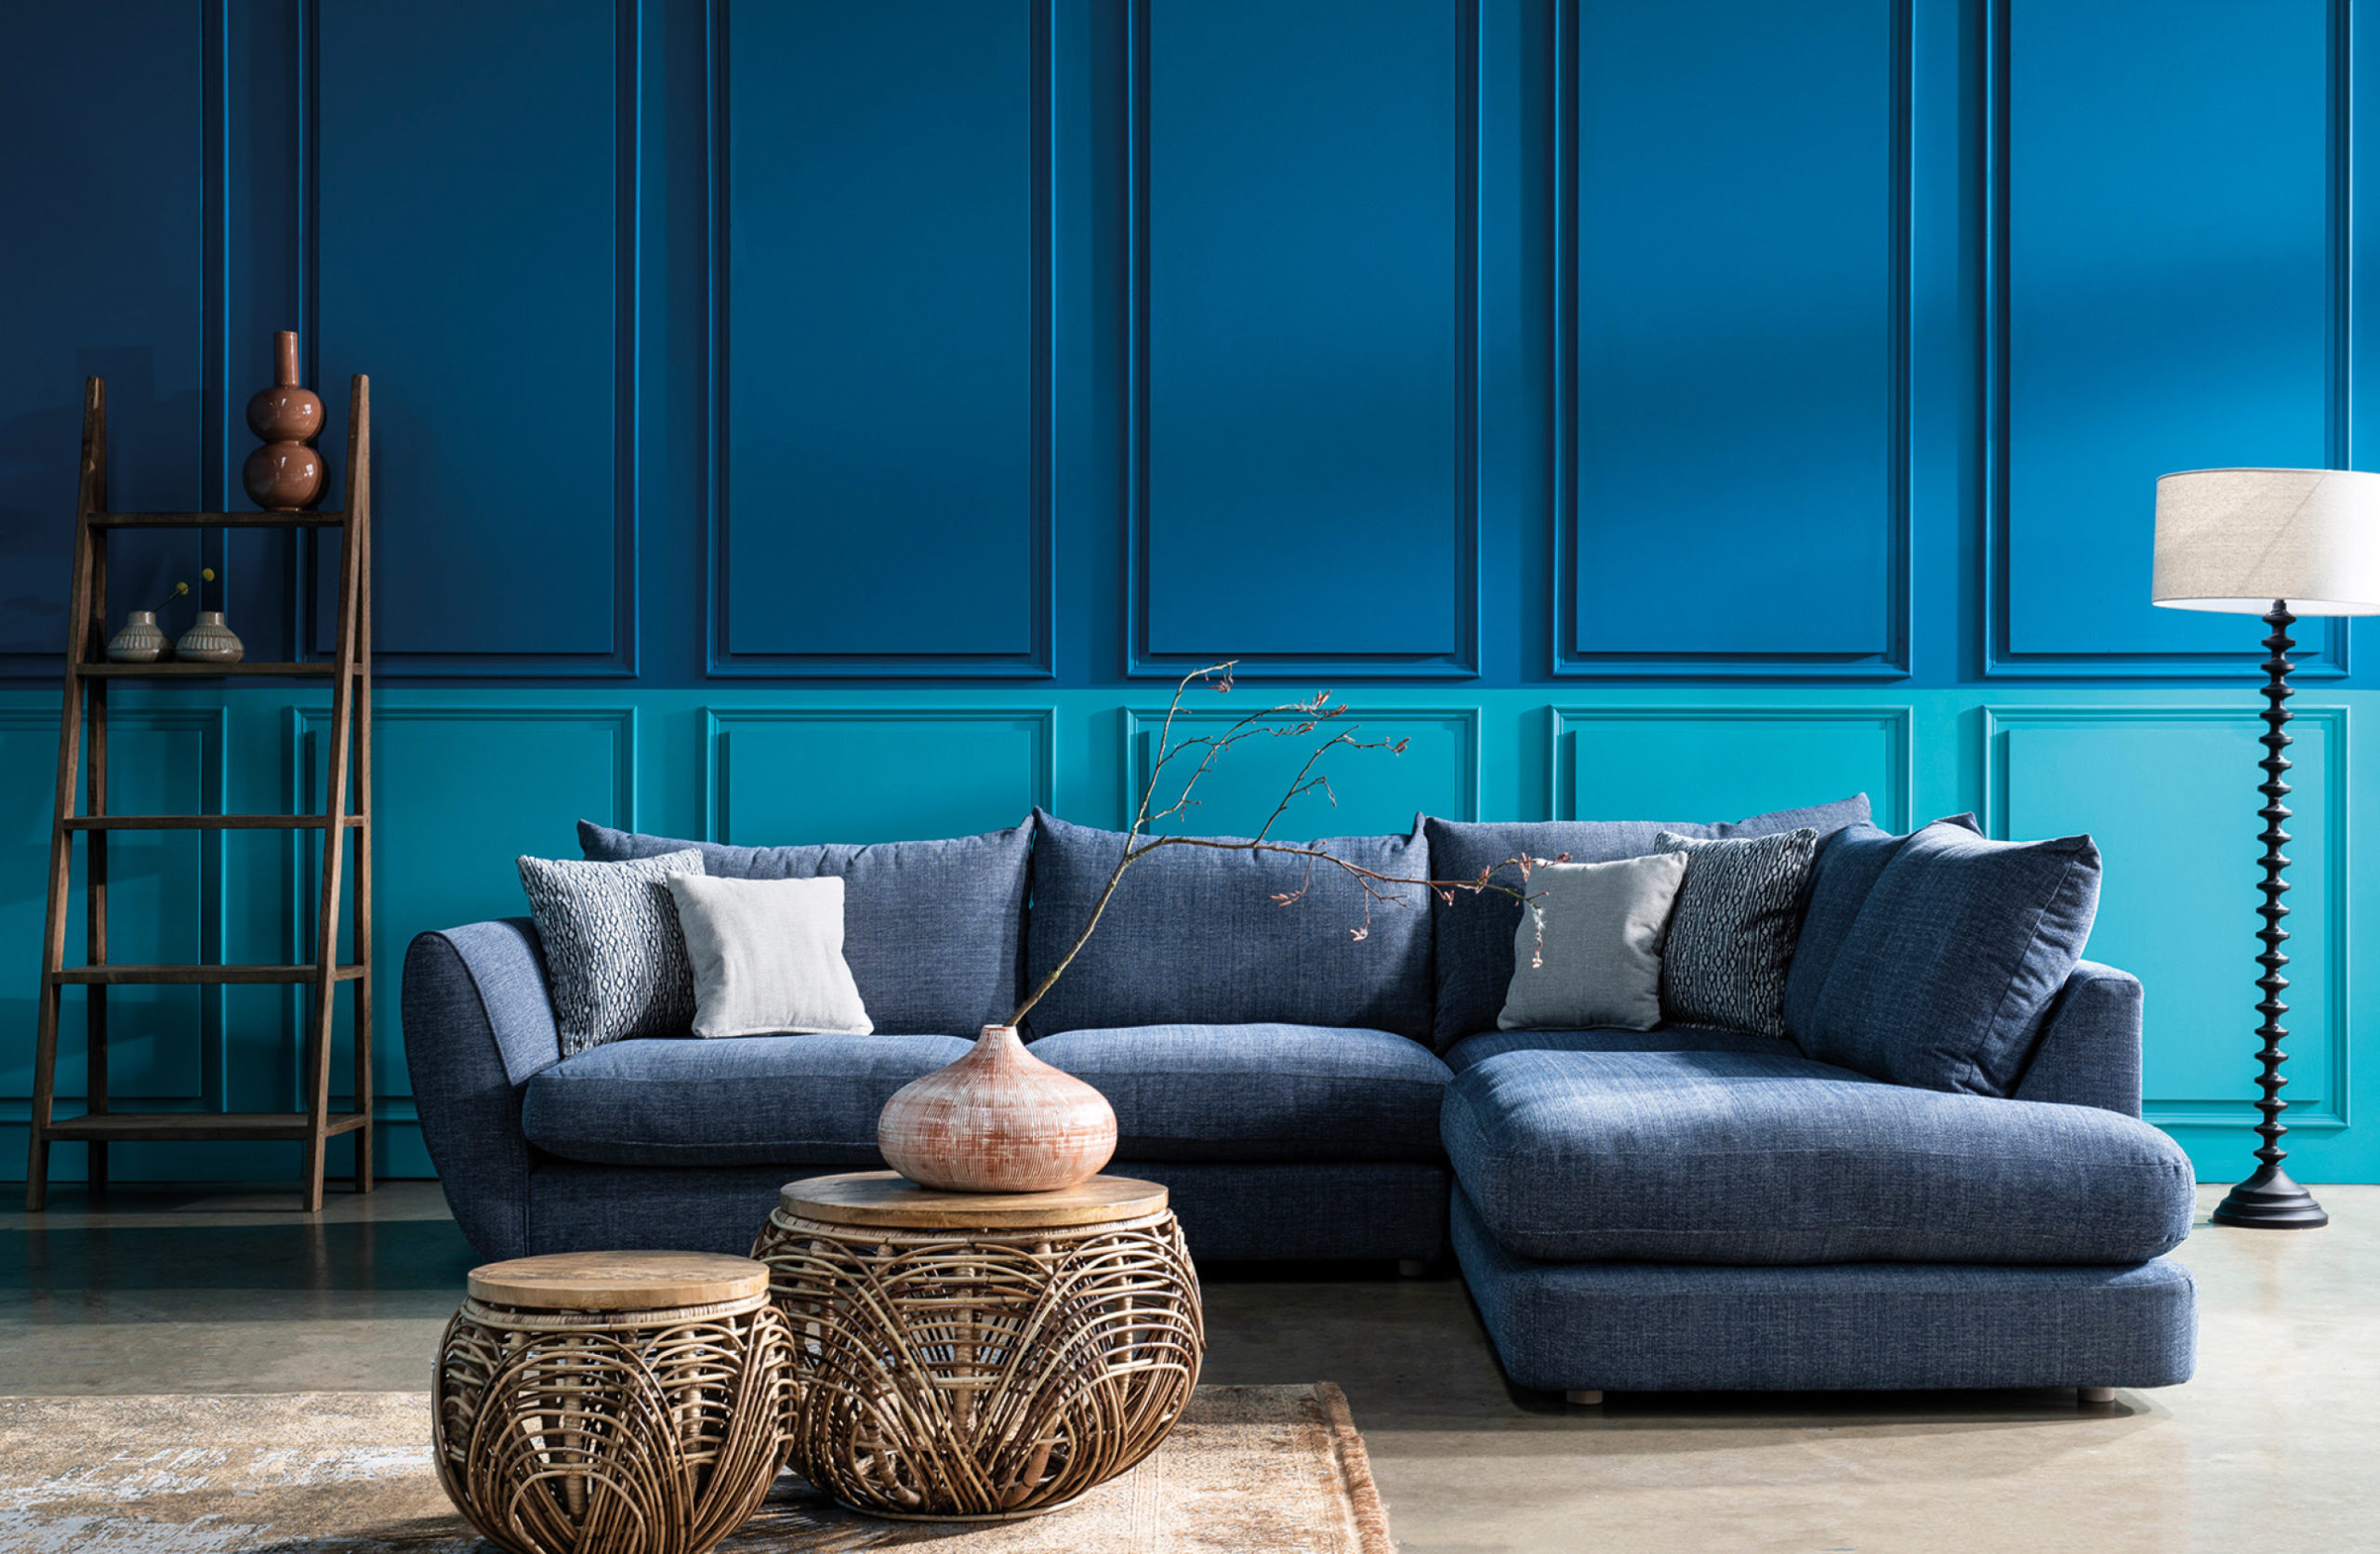 Blue corner sofa from Barker and Stonehouse's sustainable Big Blue range